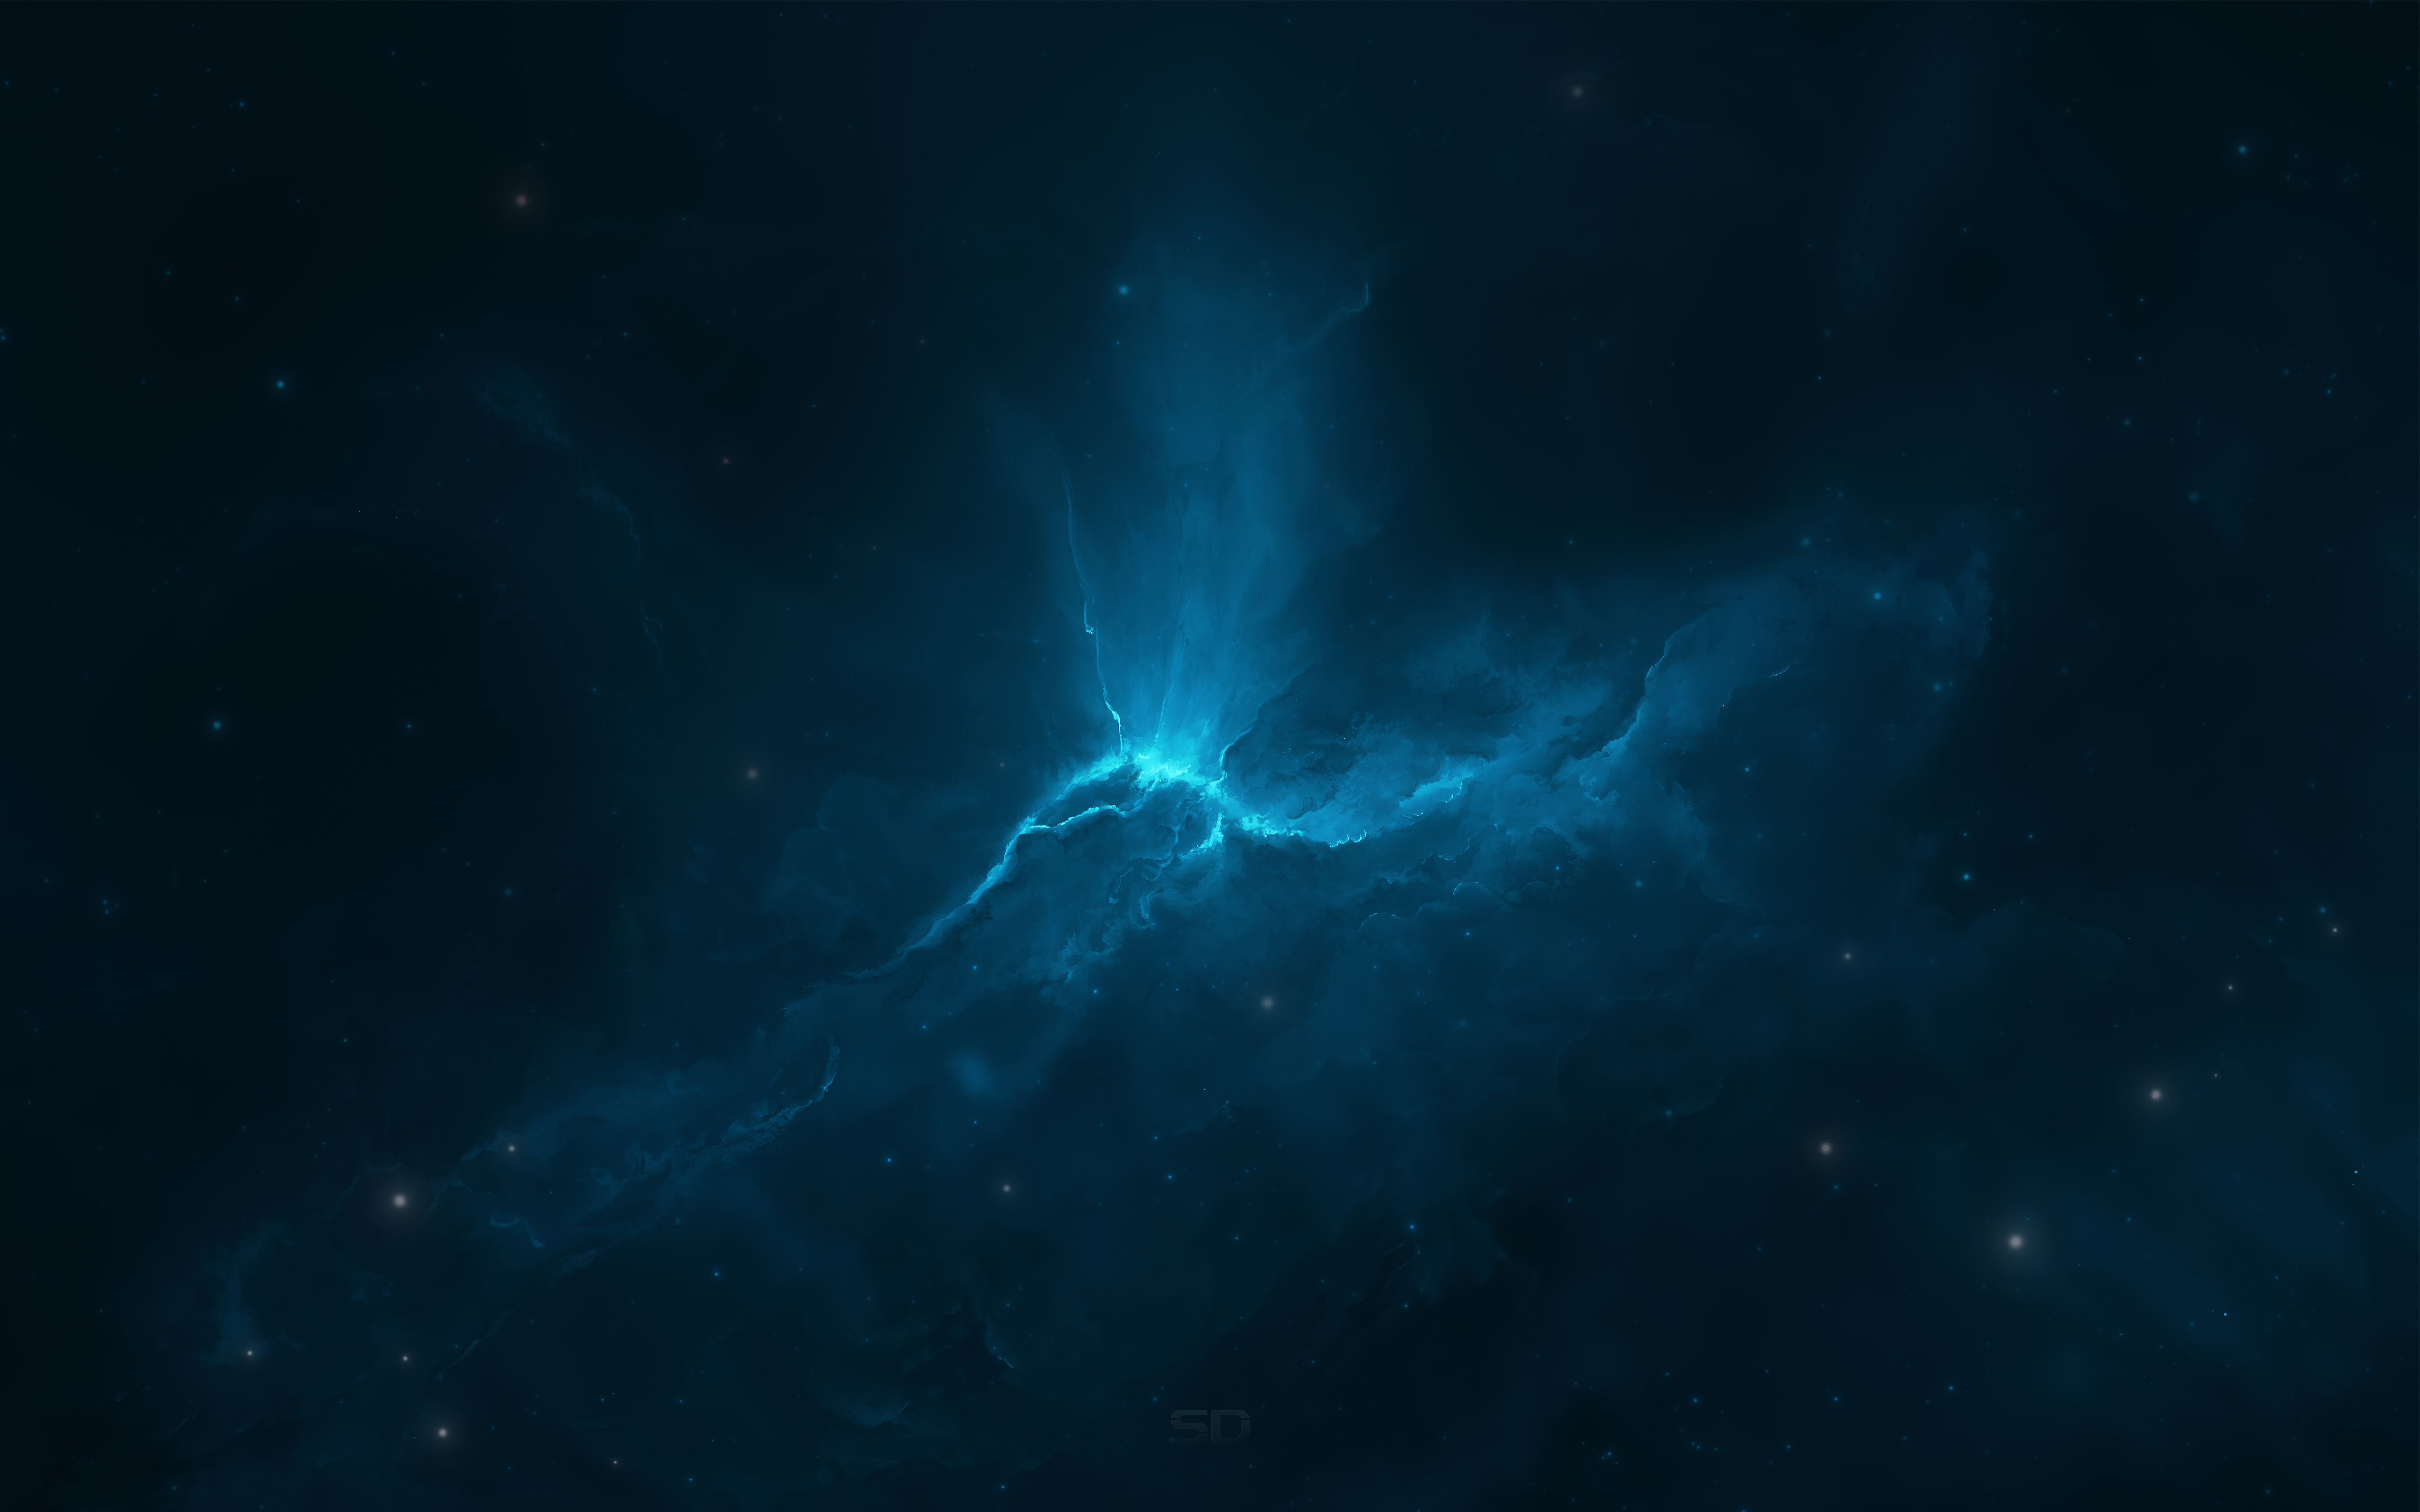 740+ 4K Space Wallpapers | Background Images